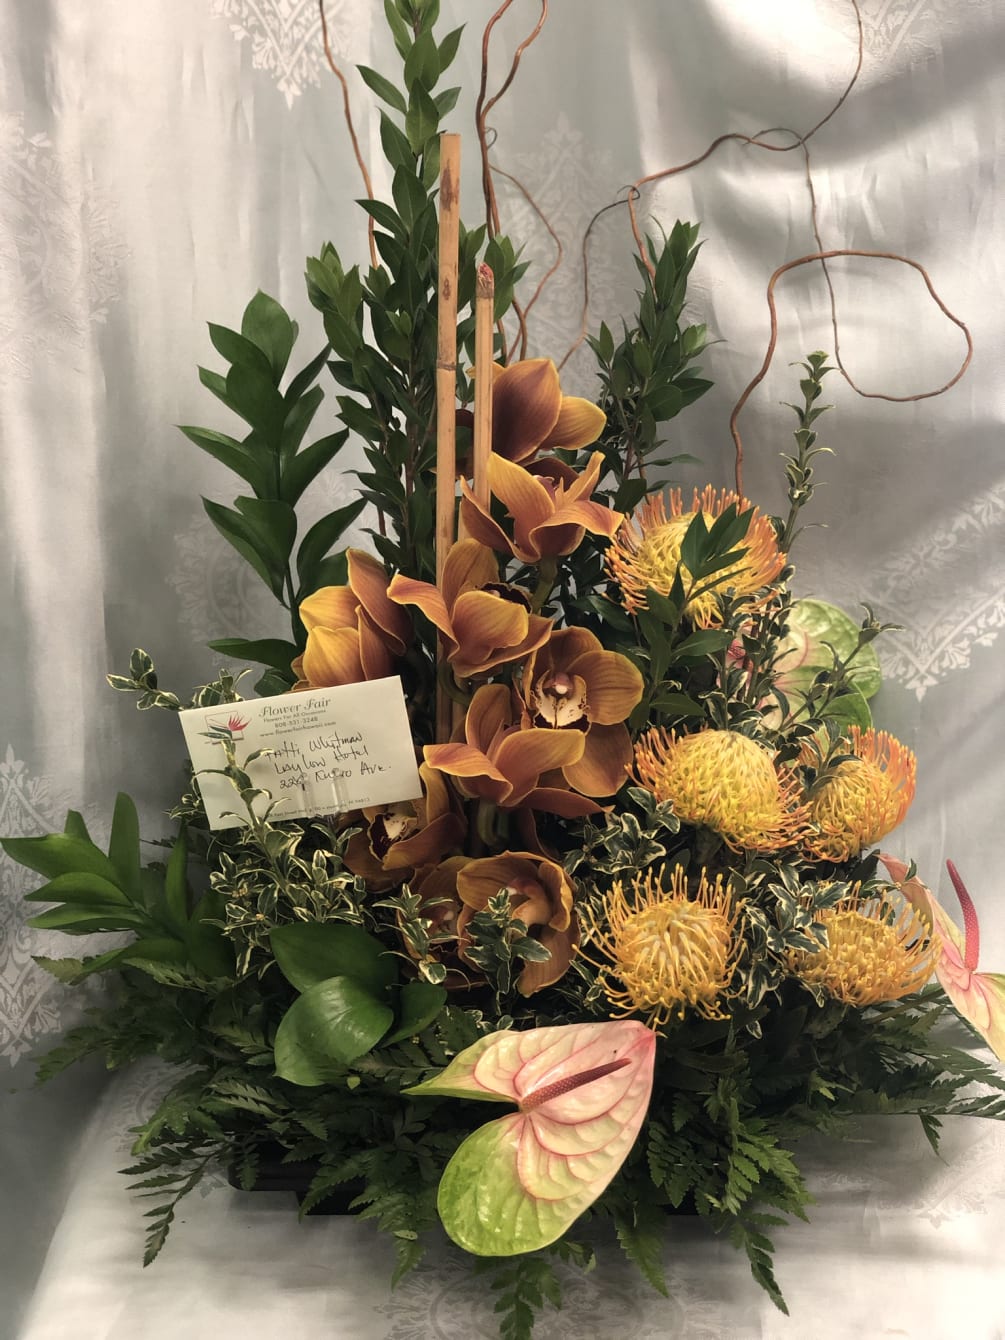 All tropical arrangement with yellow protea, orange cymbidium orchids accented with anthuriums.